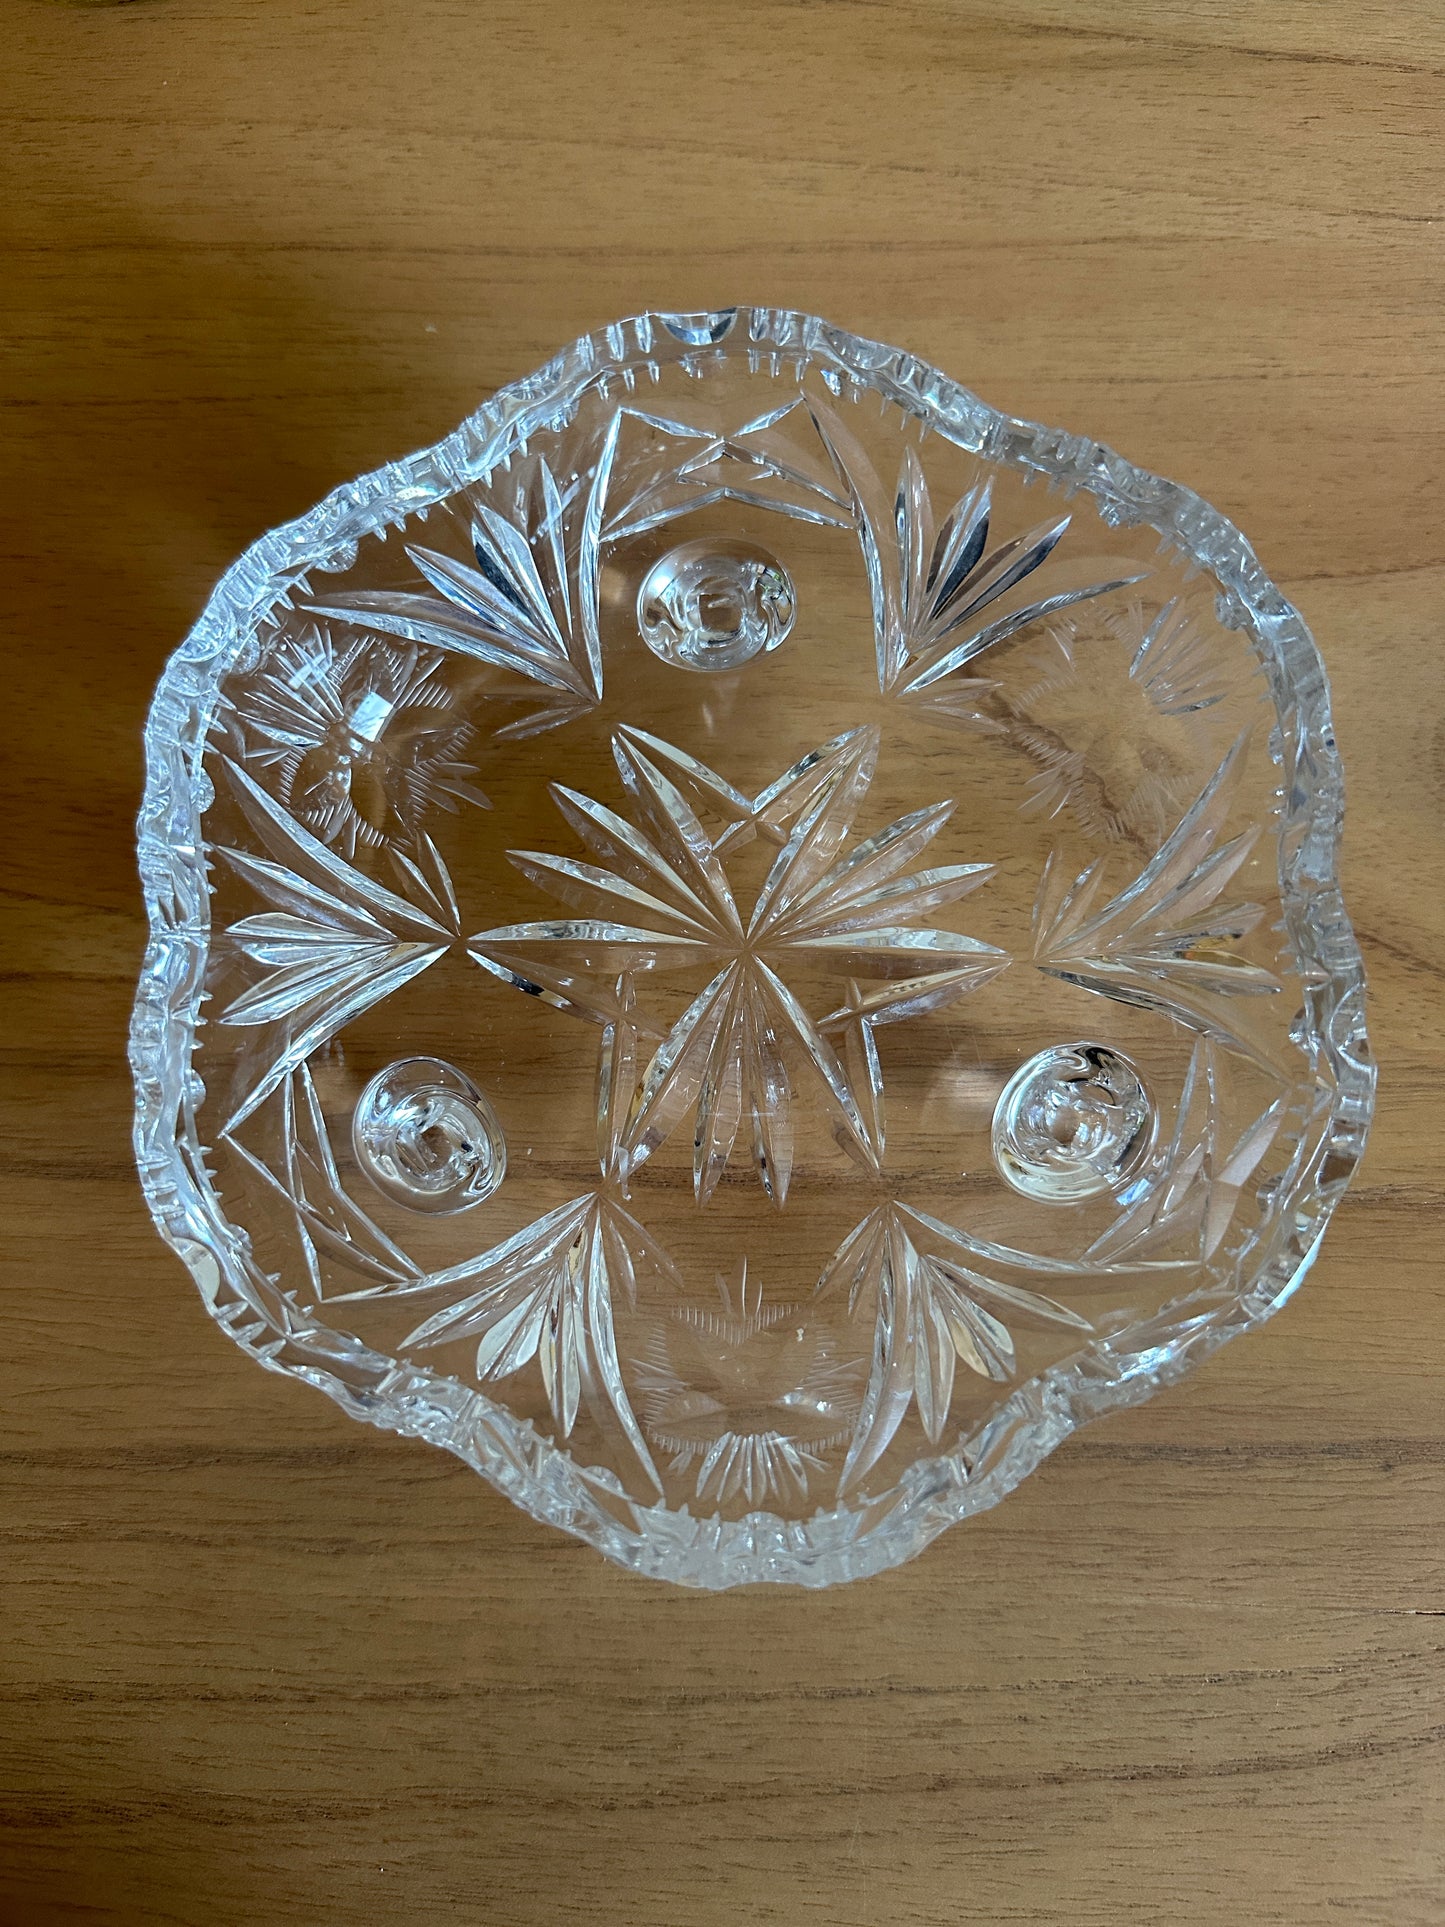 Vintage Victorian Hand Cut Footed Lead Crystal Candy Dish